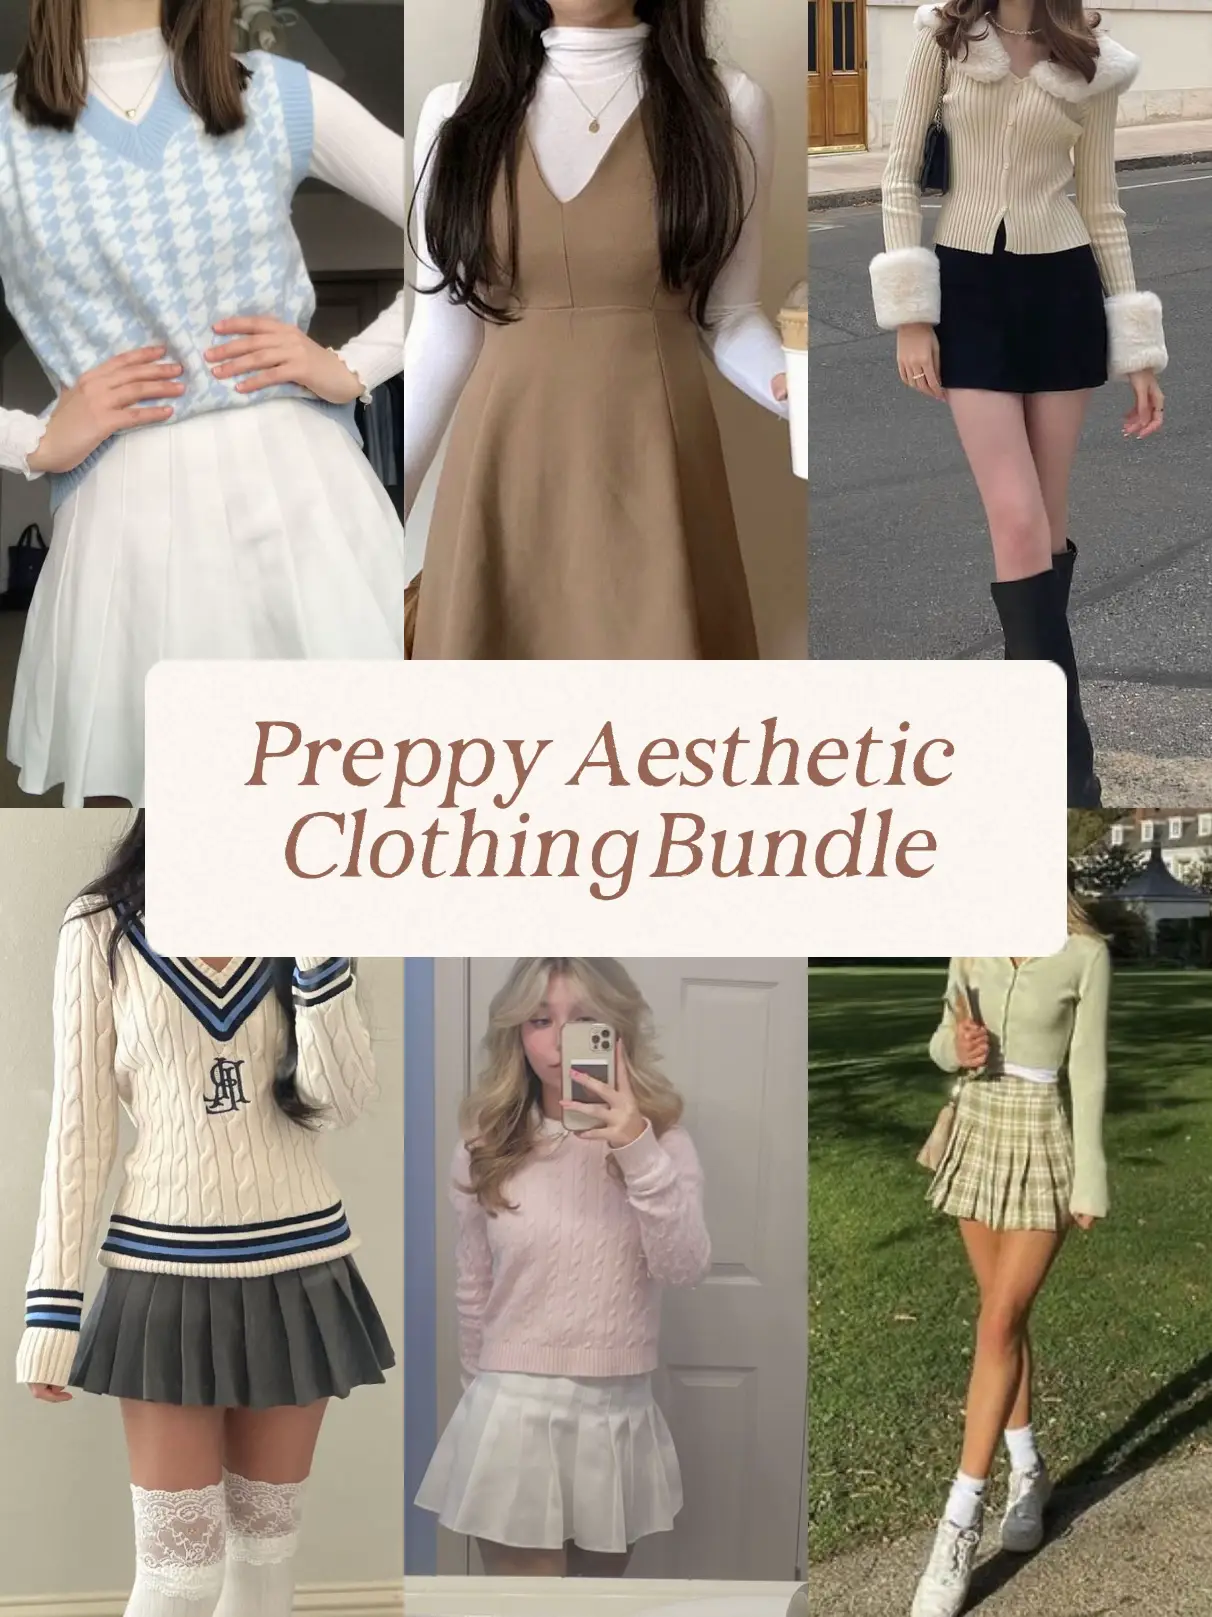 🔥🔥Preppy Aesthetic Clothing Bundle 🛍🛍, Gallery posted by Rainbow 🌈